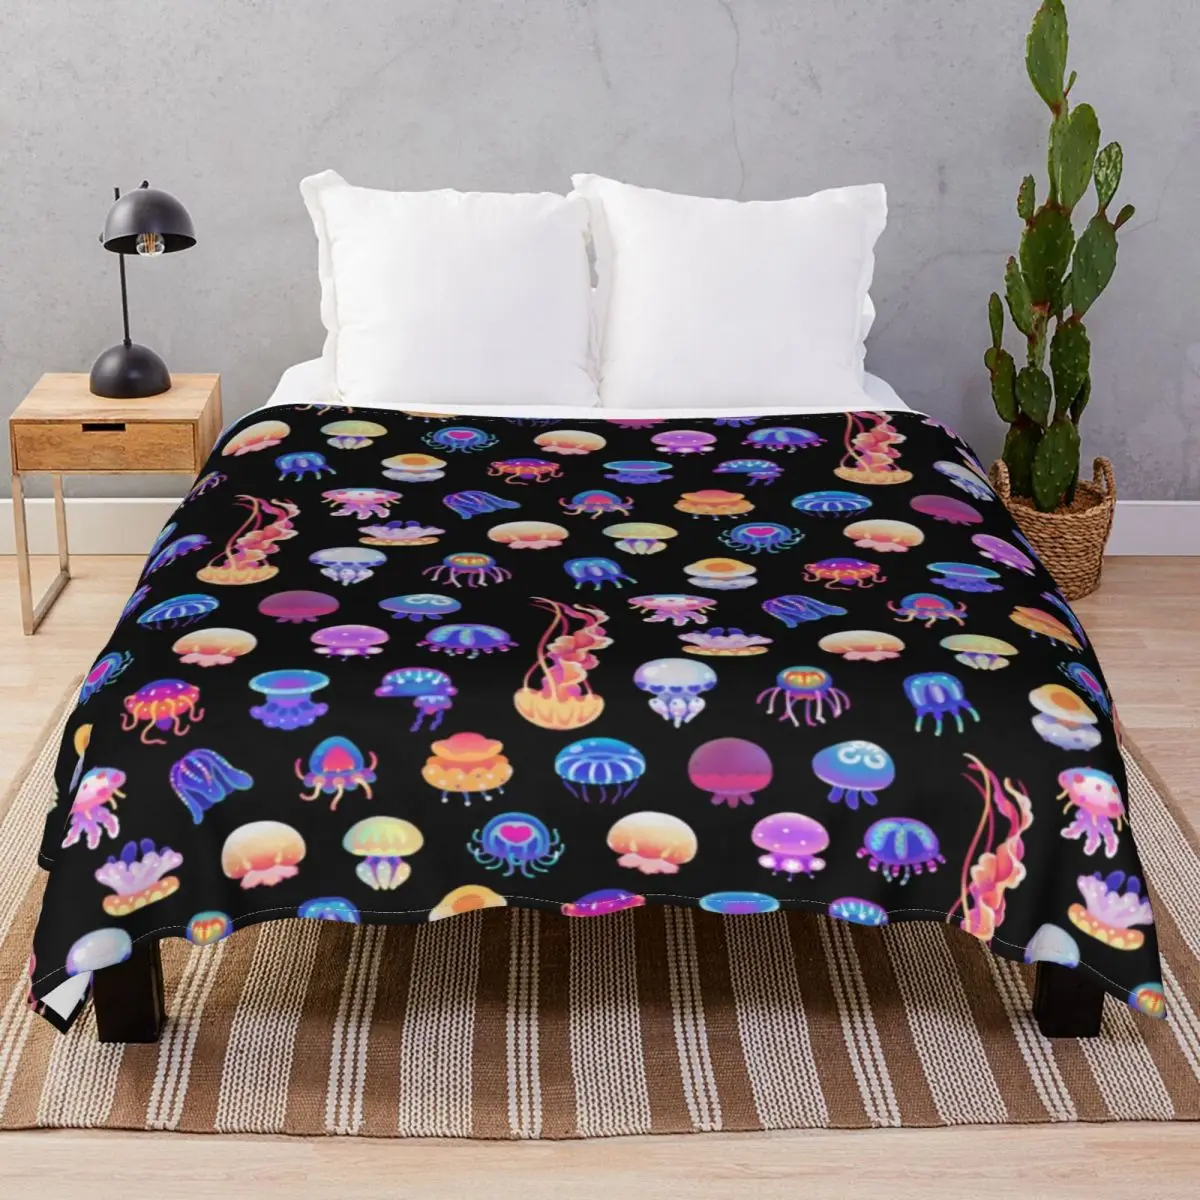 Jellyfish Day Blanket Flannel Plush Print Breathable Throw Blankets for Bedding Sofa Camp Cinema